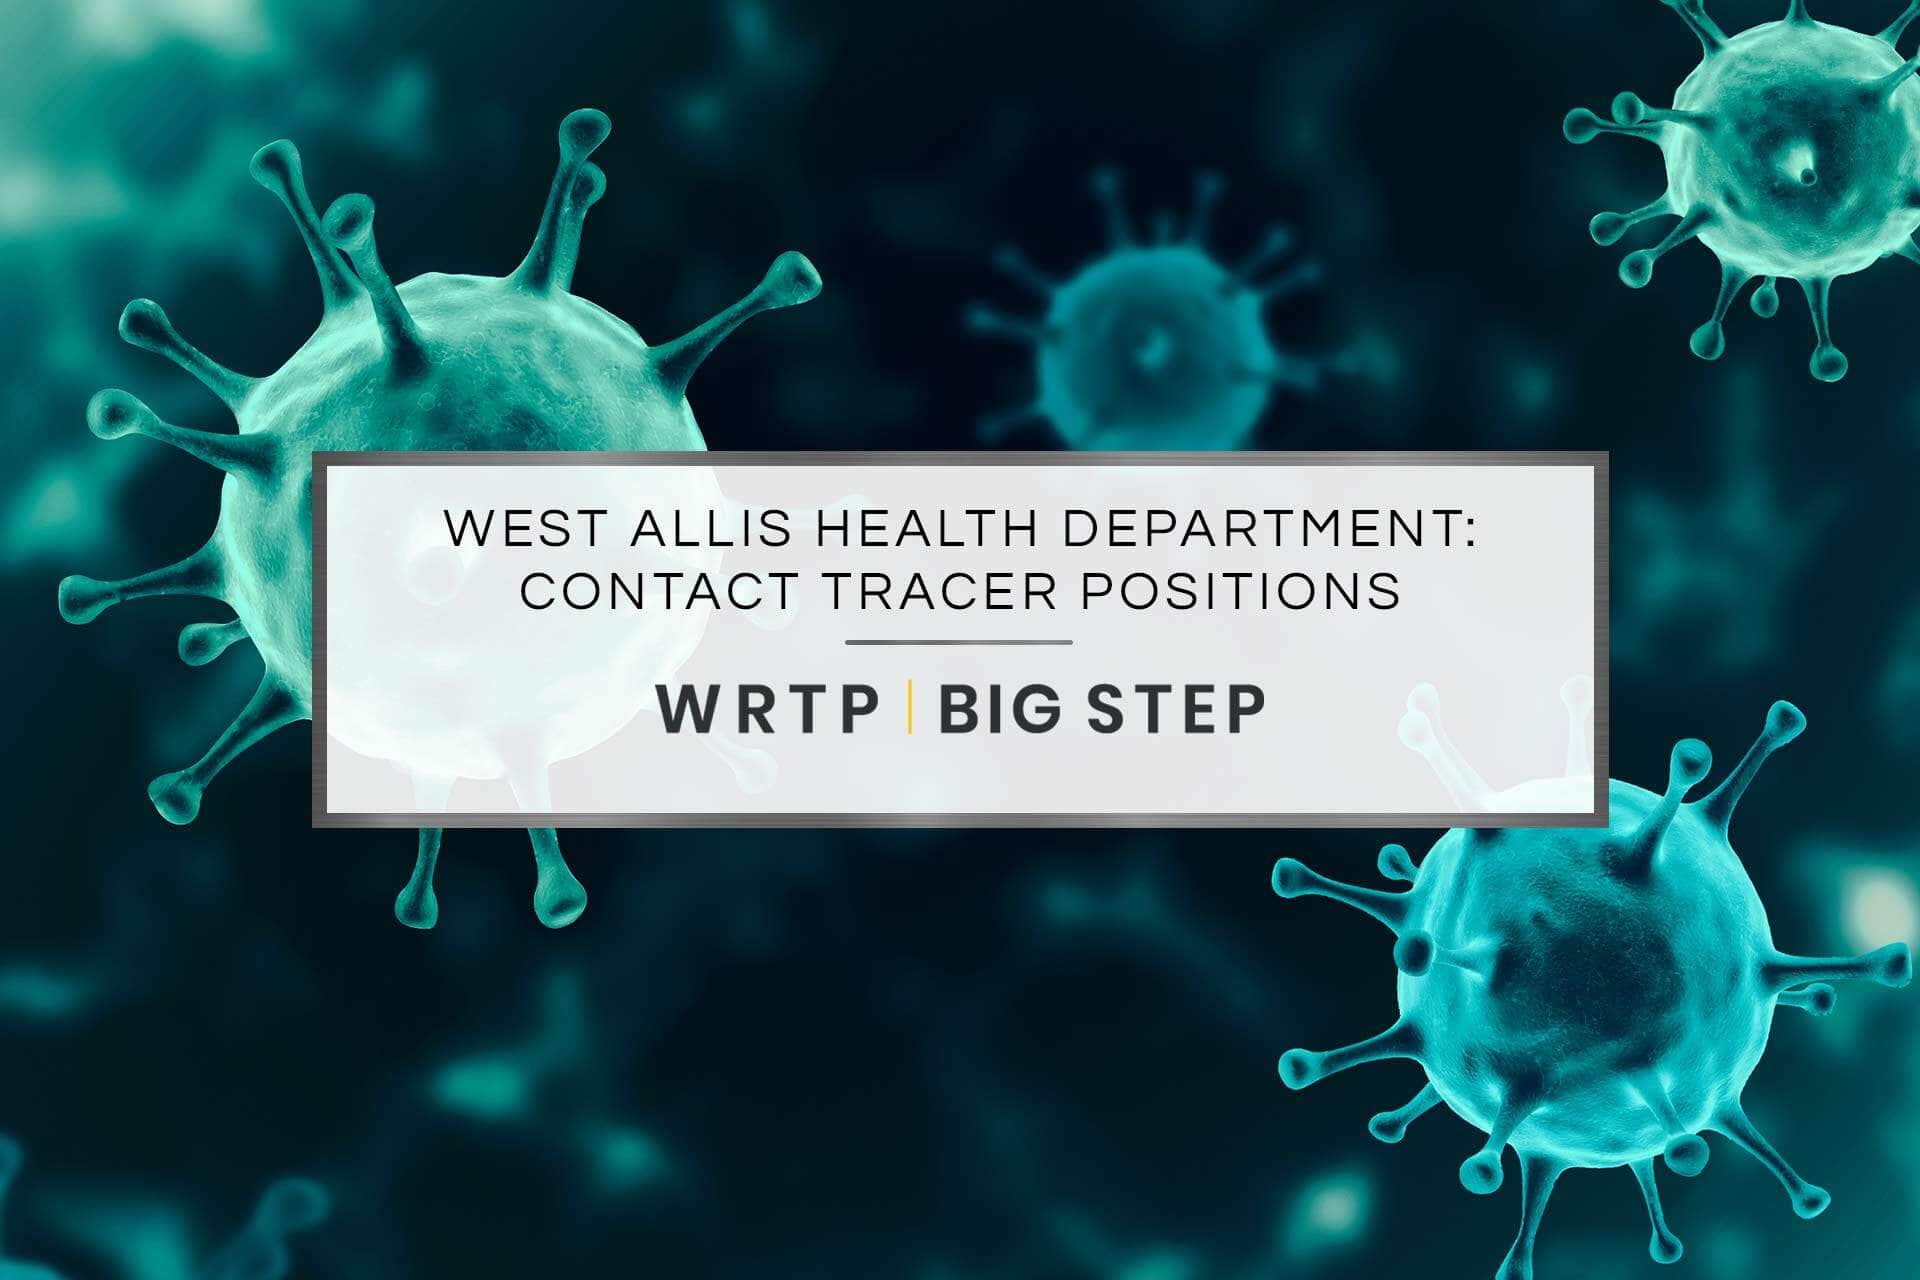 West Allis Health Department: Contact Tracer Positions